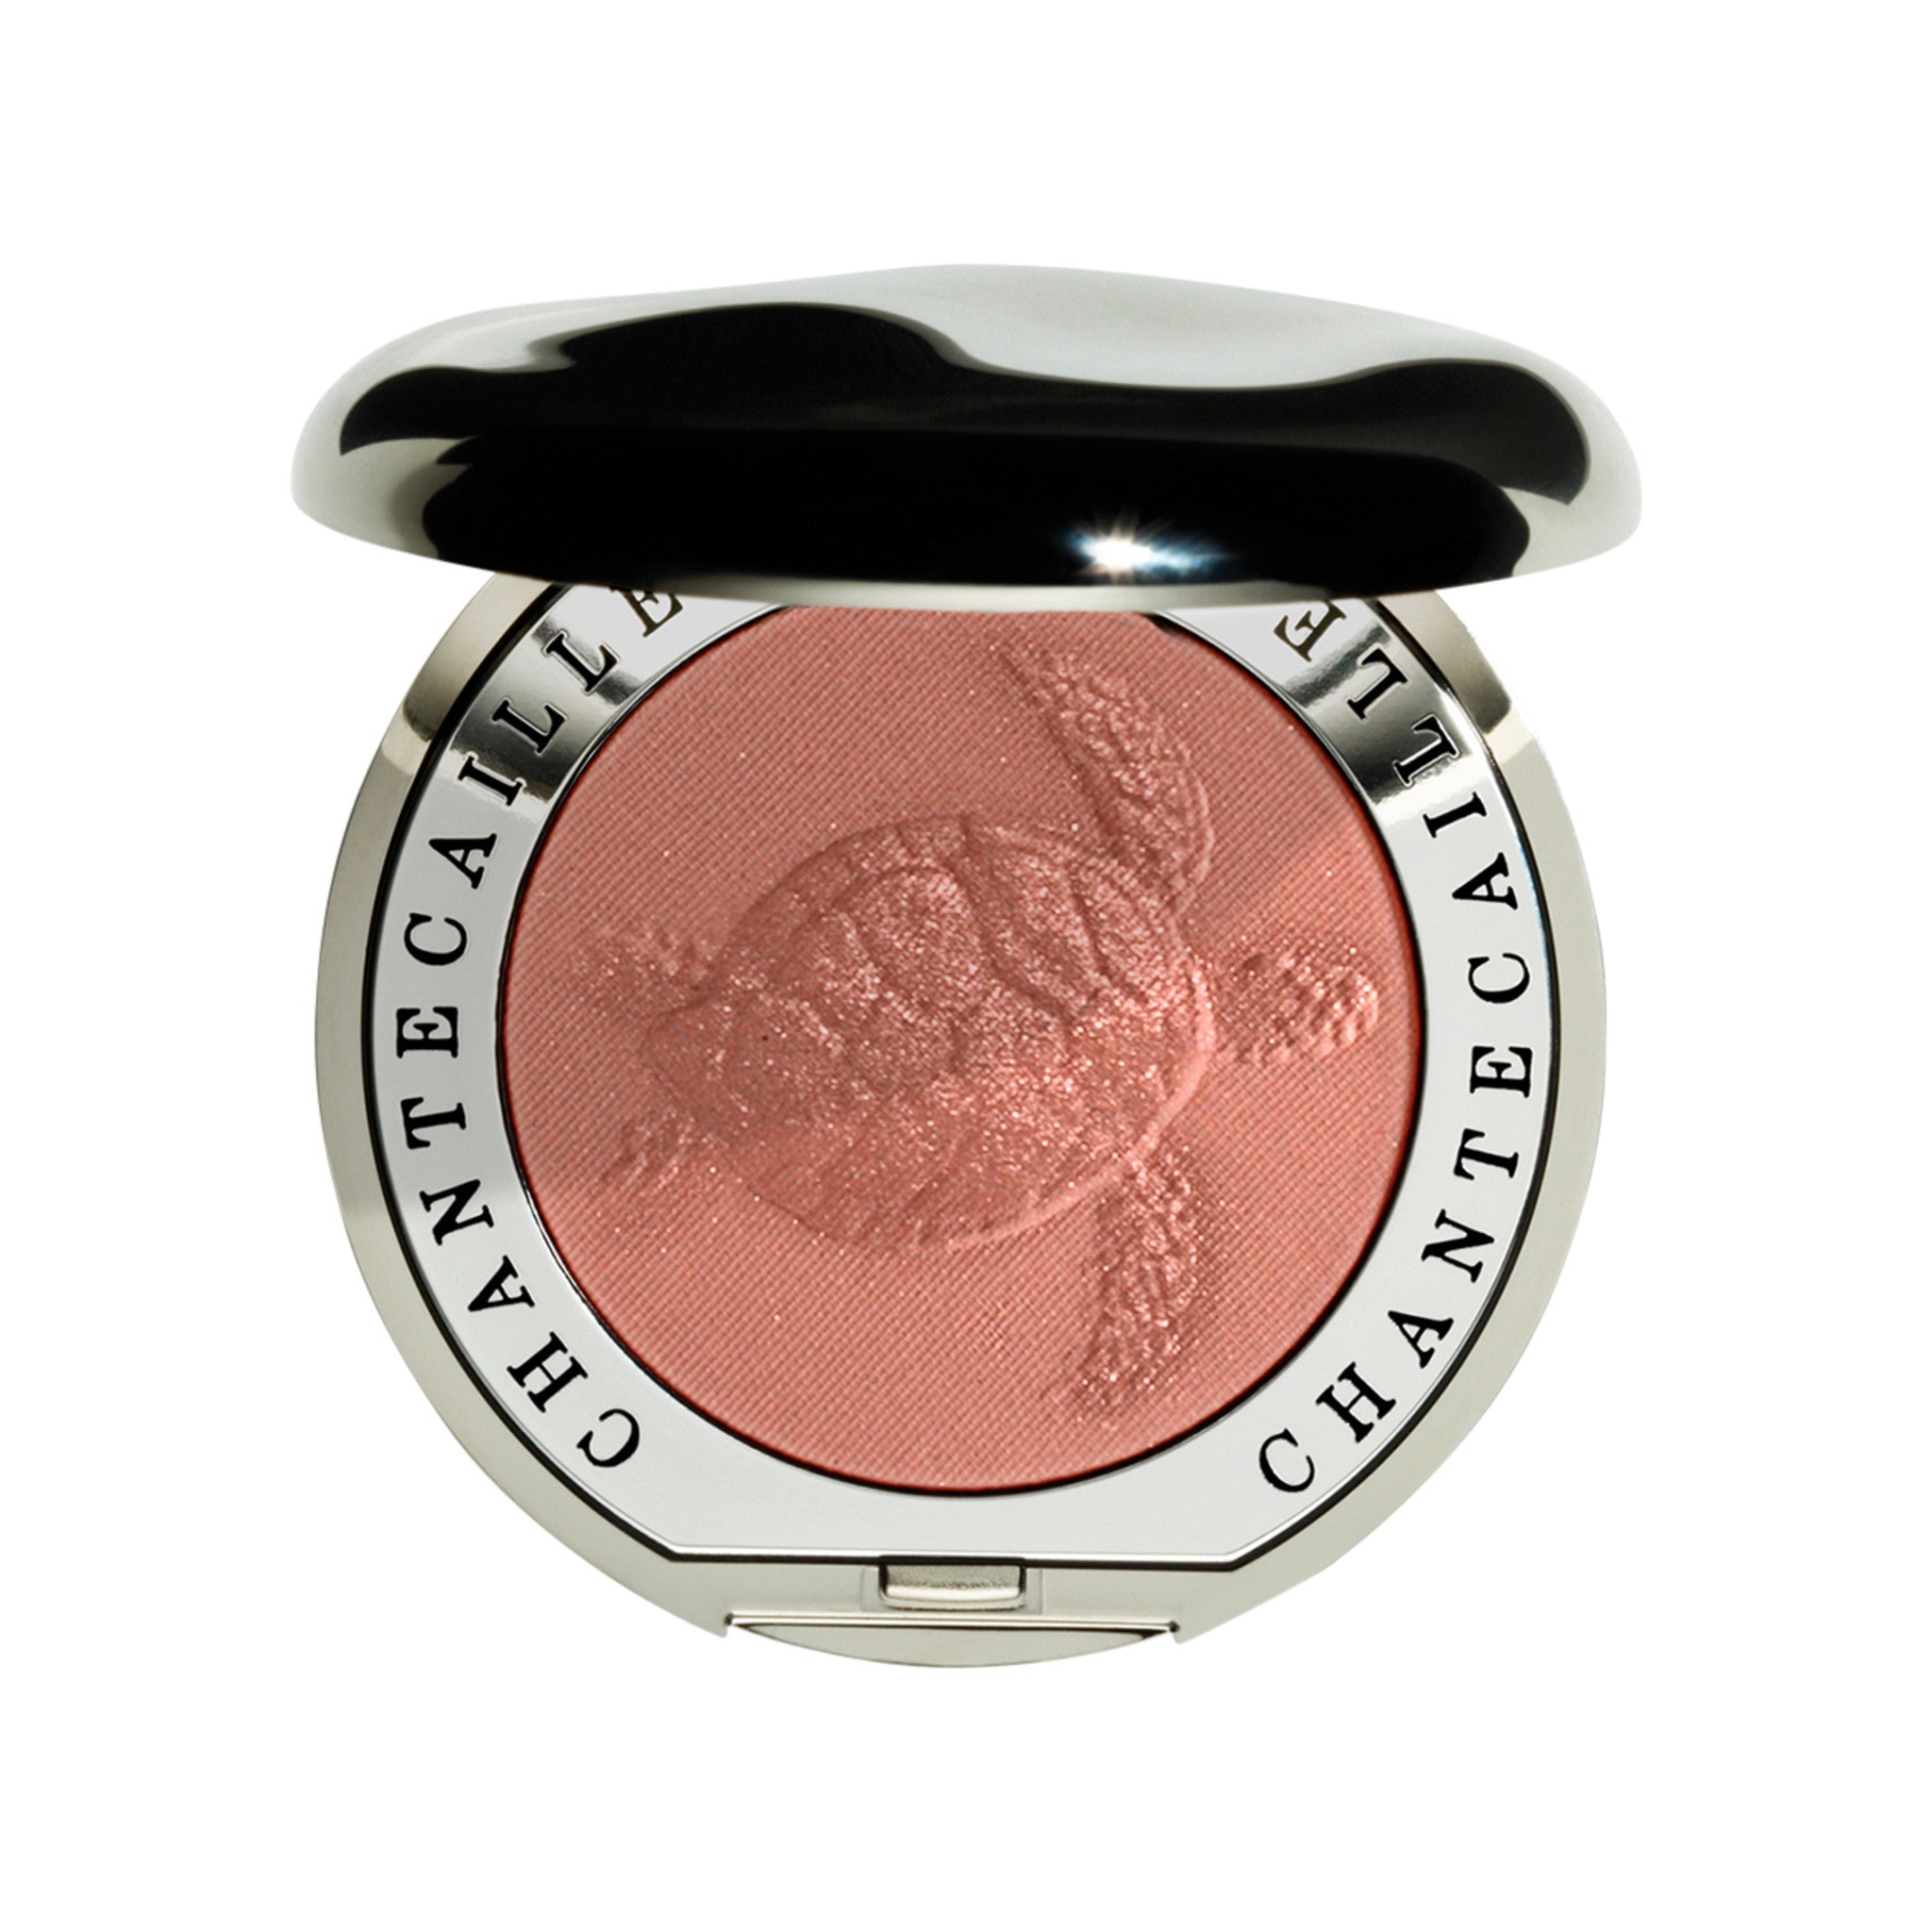 Chantecaille Philanthropy Cheek Shade Color/Shade variant: Grace with Turtle main image. This product is in the color pink